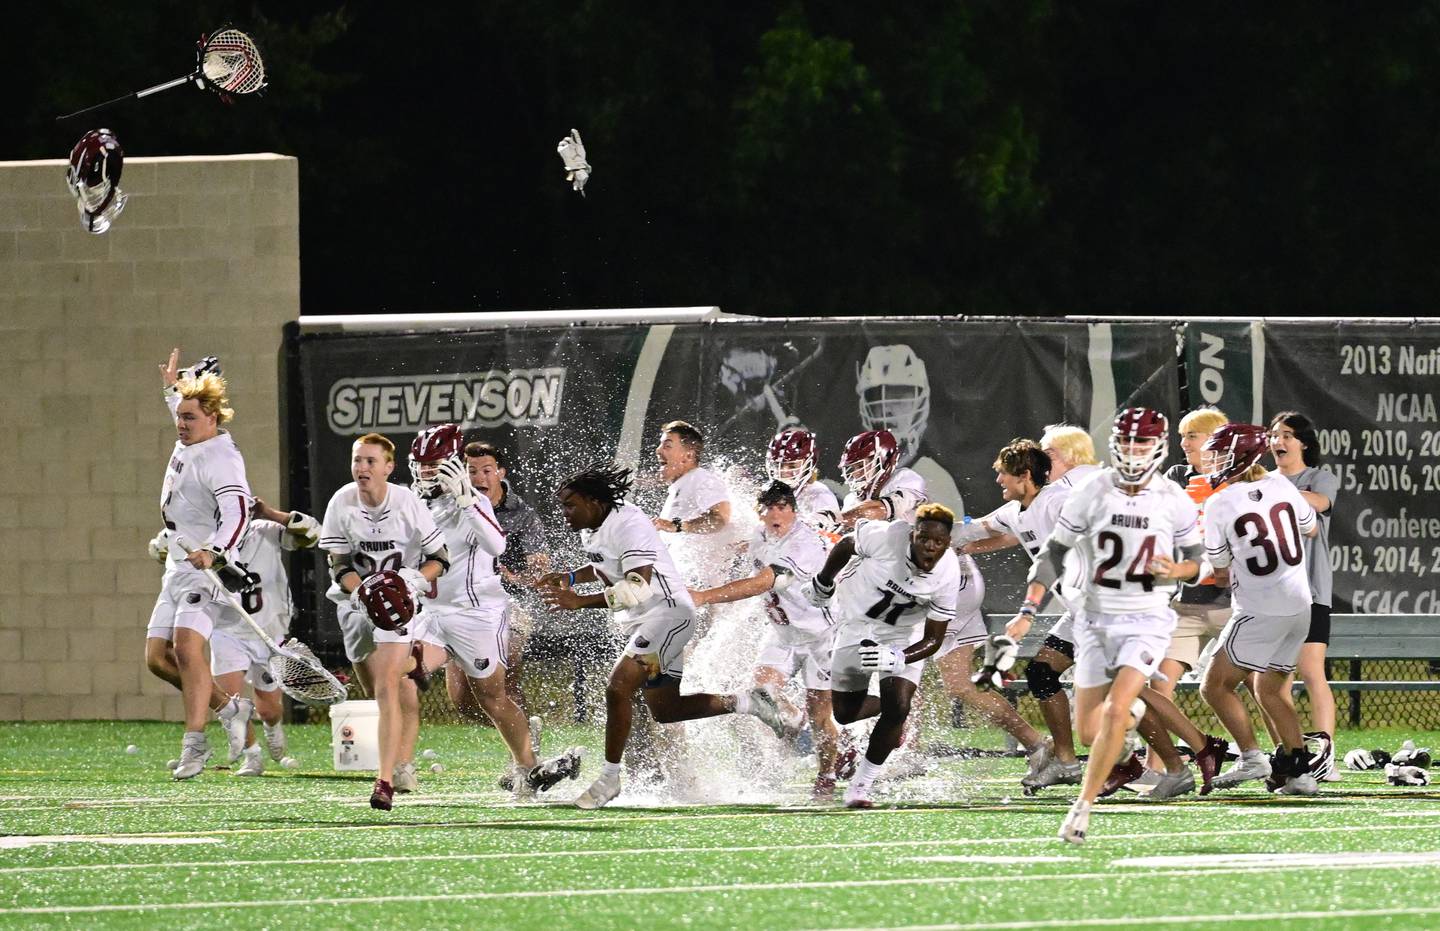 With ice and water showering down, the Broadneck bench races onto the field at the final horn to celebrate their team's 16-6 victory over Sherwood in the Class 4A boys lacrosse state championship game at Stevenson University.